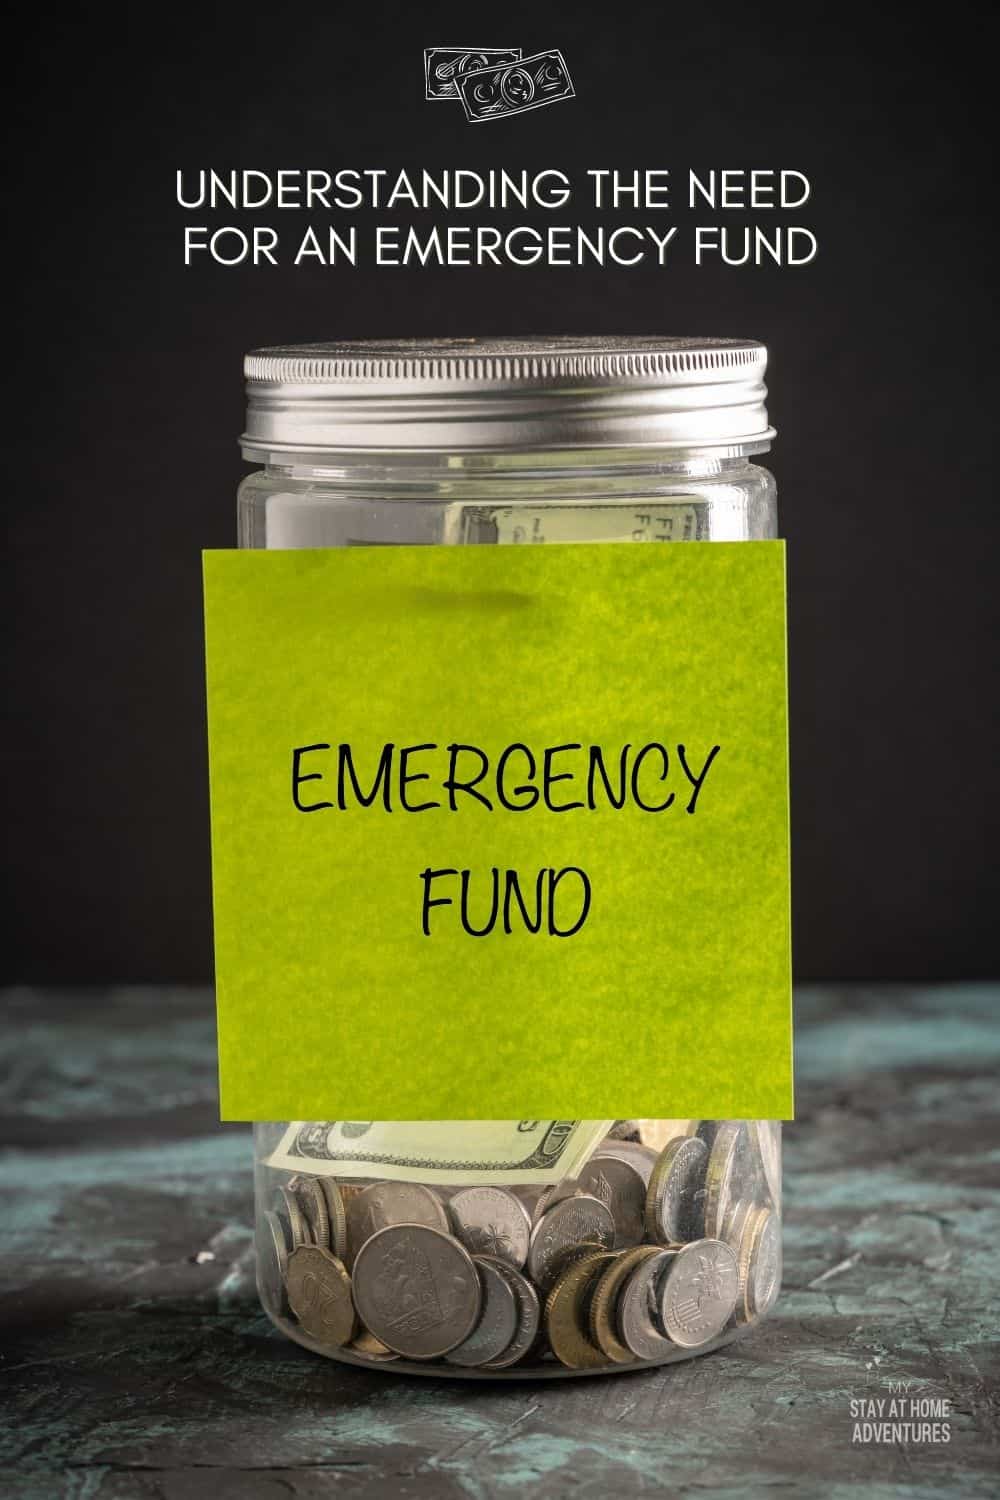 Find out the reasons not having an emergency fund sucks! Without an emergency fund, you are going to get into more debt and pay even more. via @mystayathome